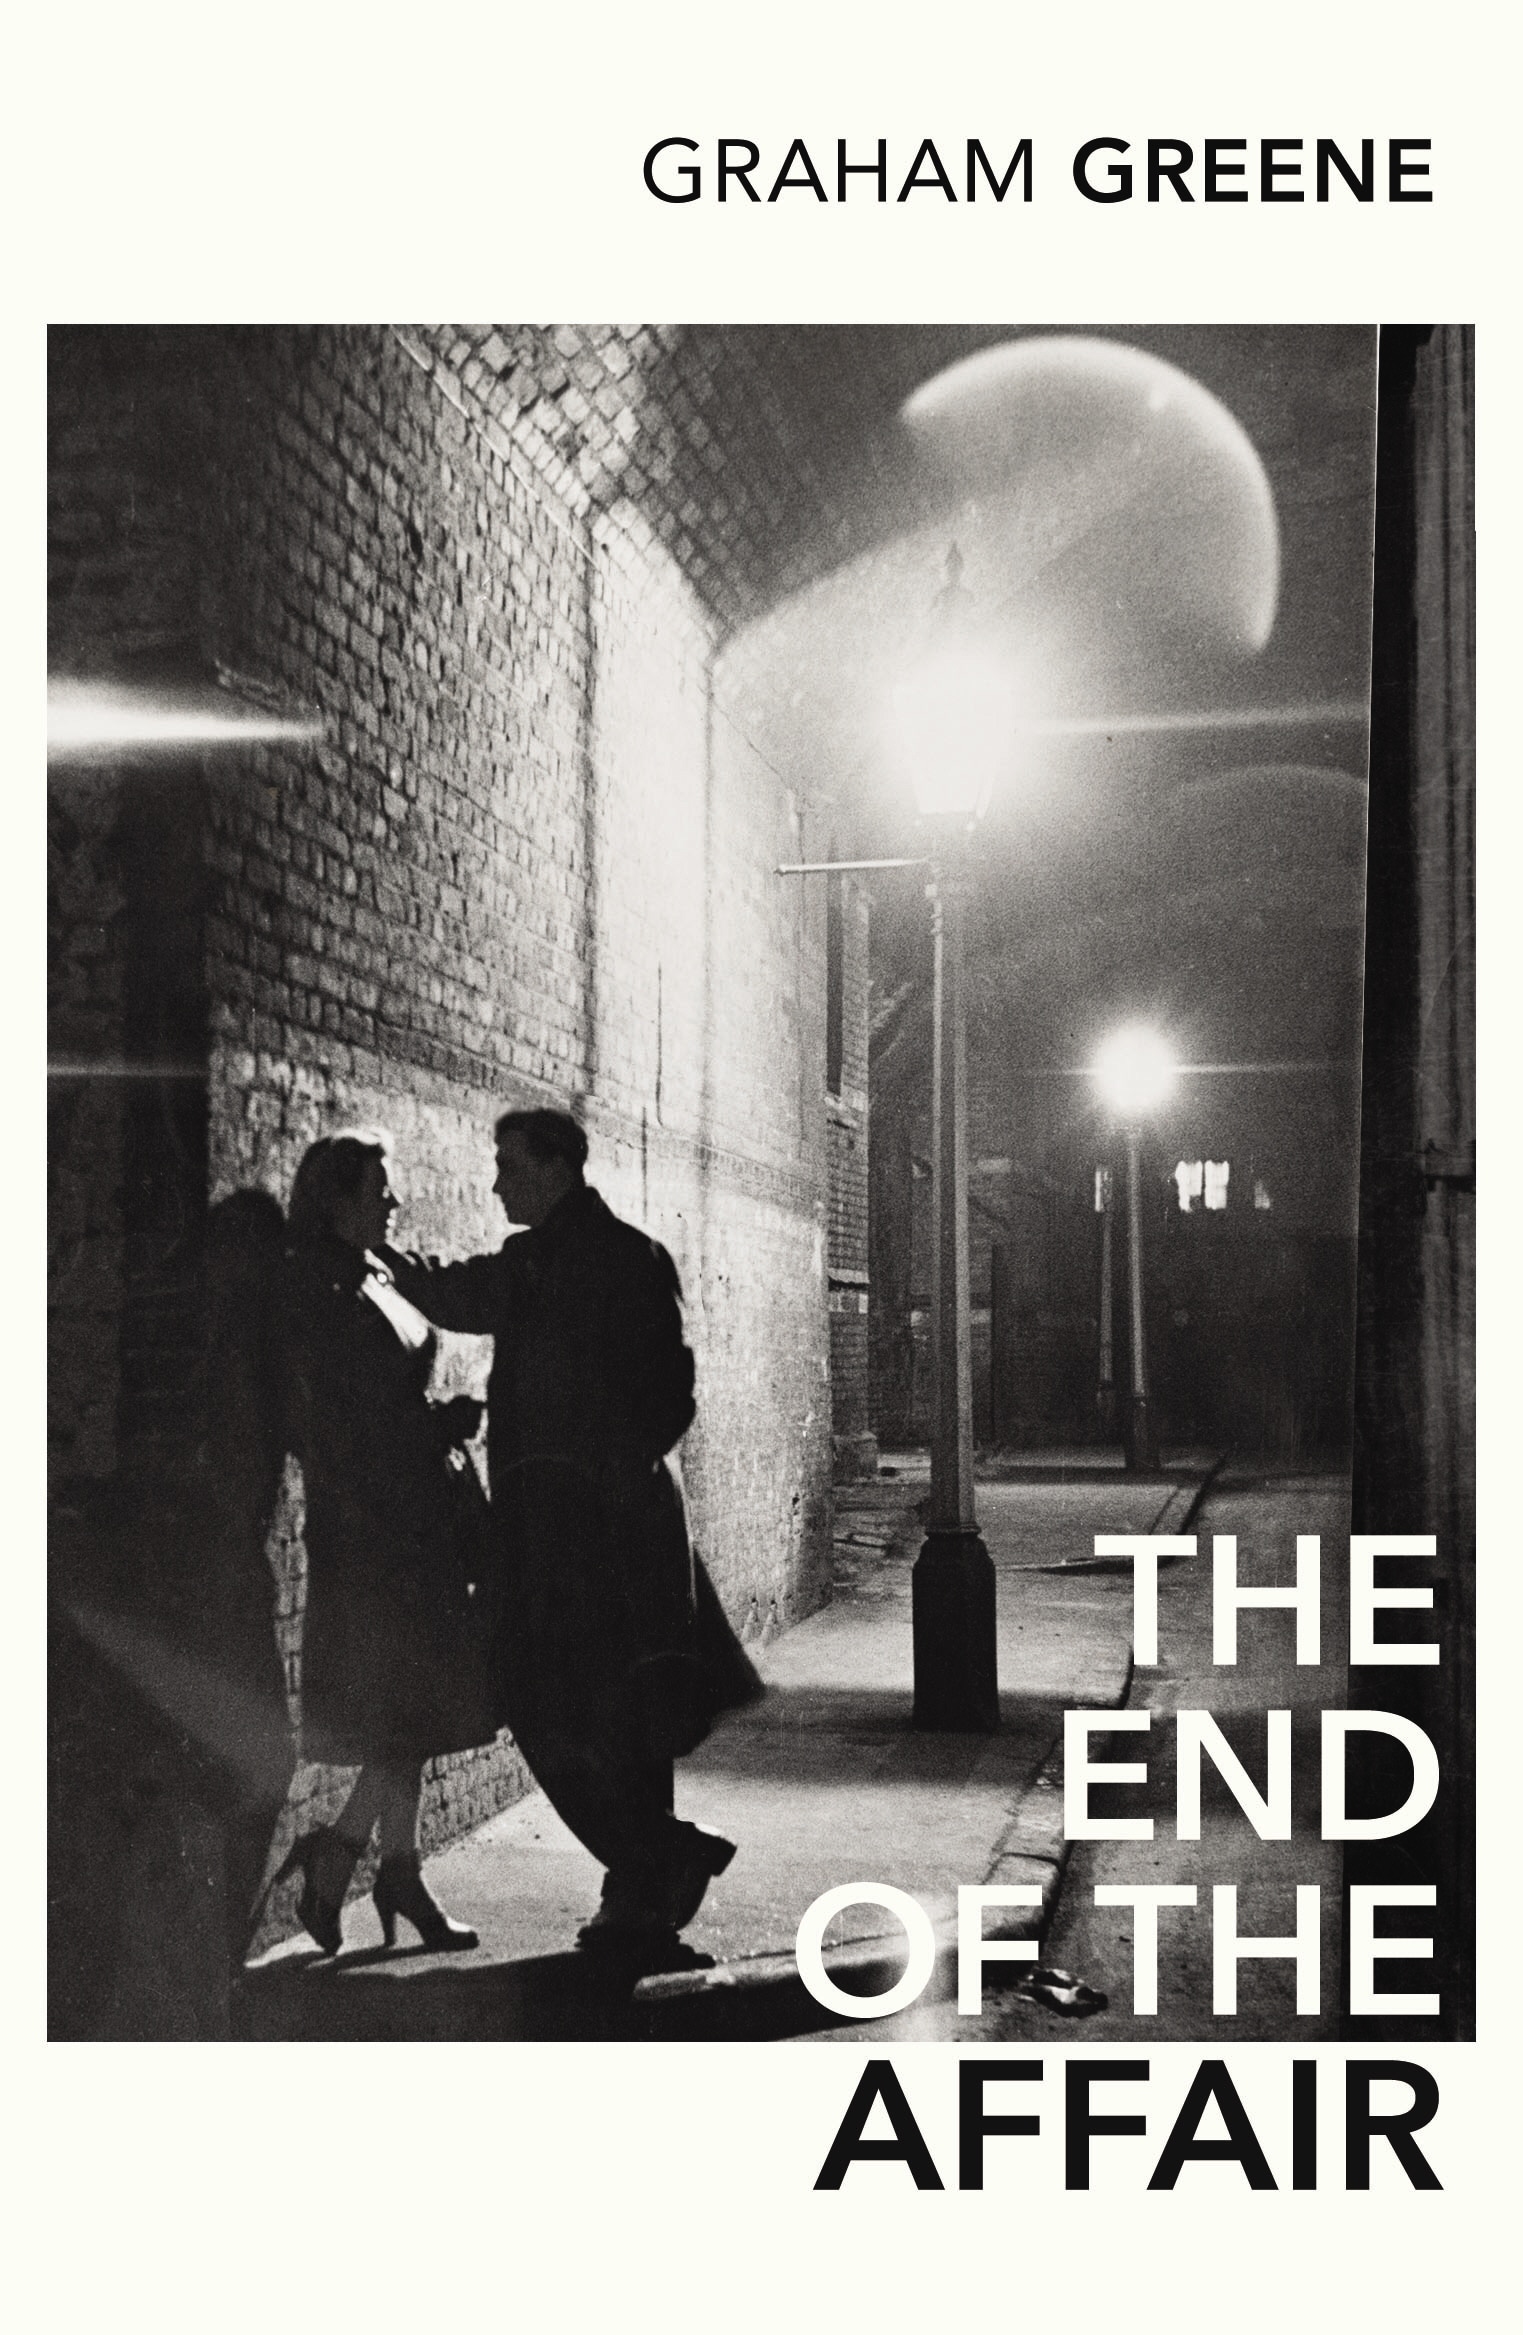 Book “The End of the Affair” by Graham Greene, Monica Ali — October 7, 2004